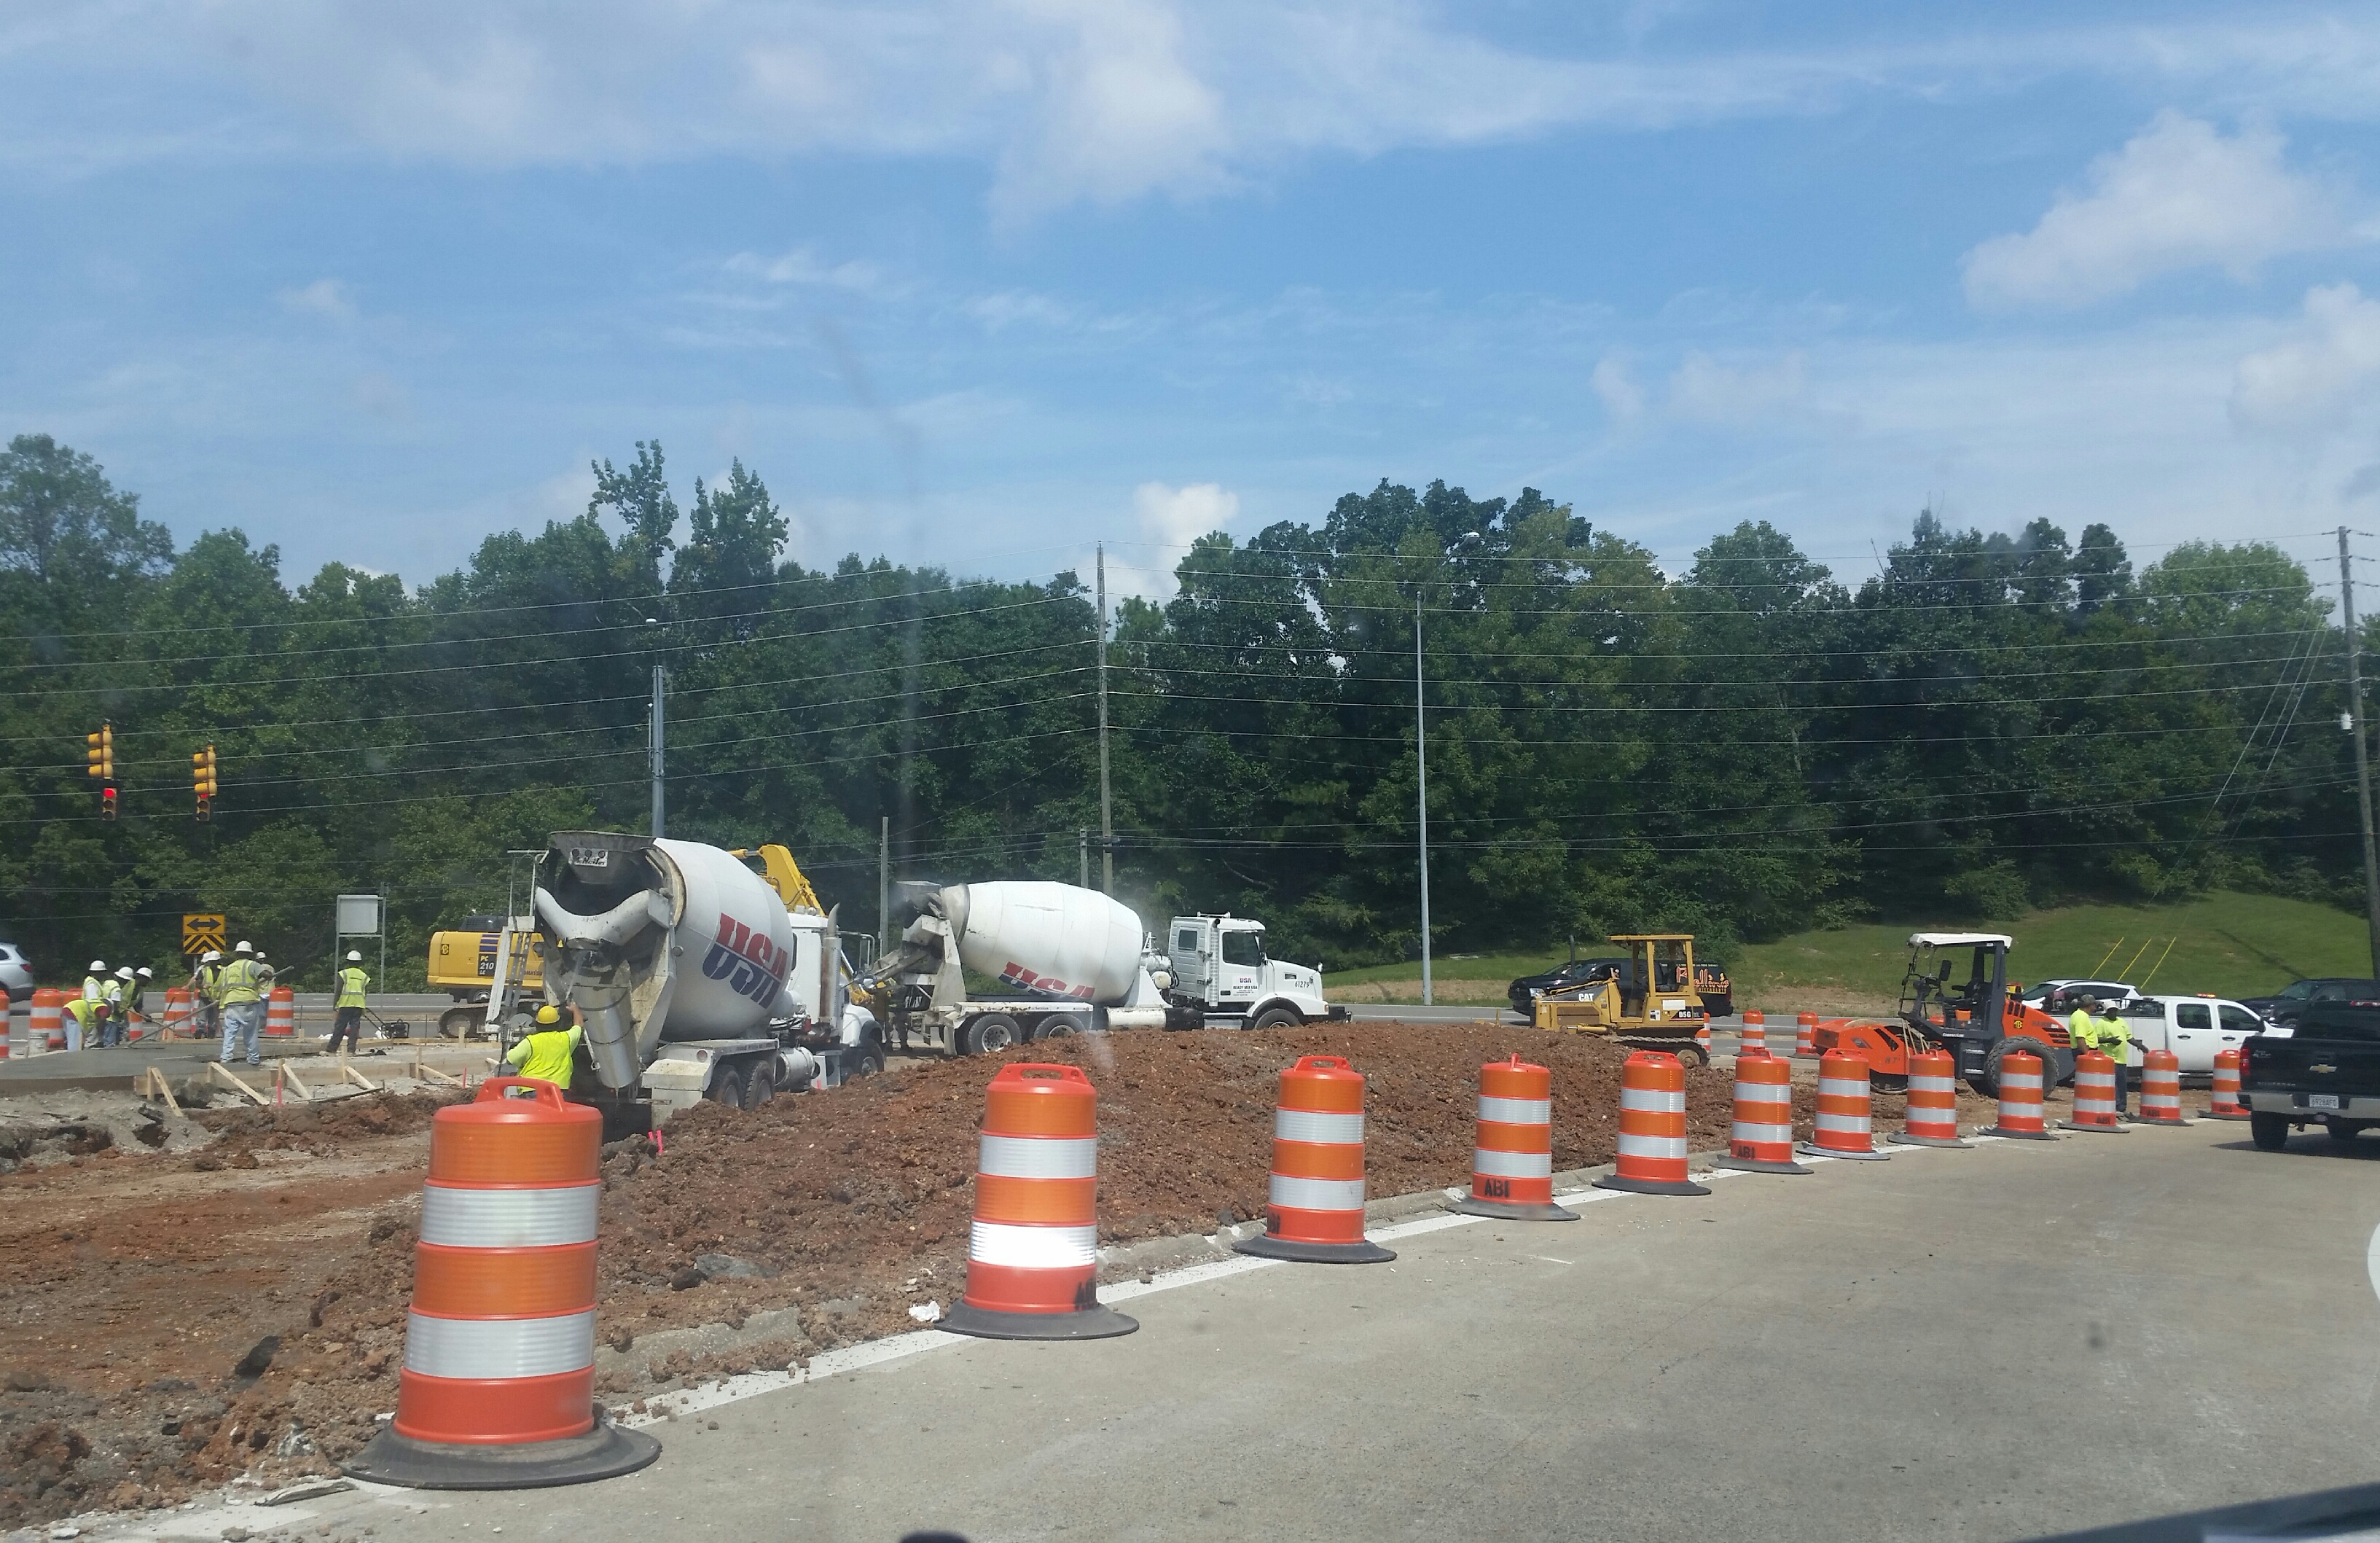 Planned lane closures on I-59 SB in Trussville